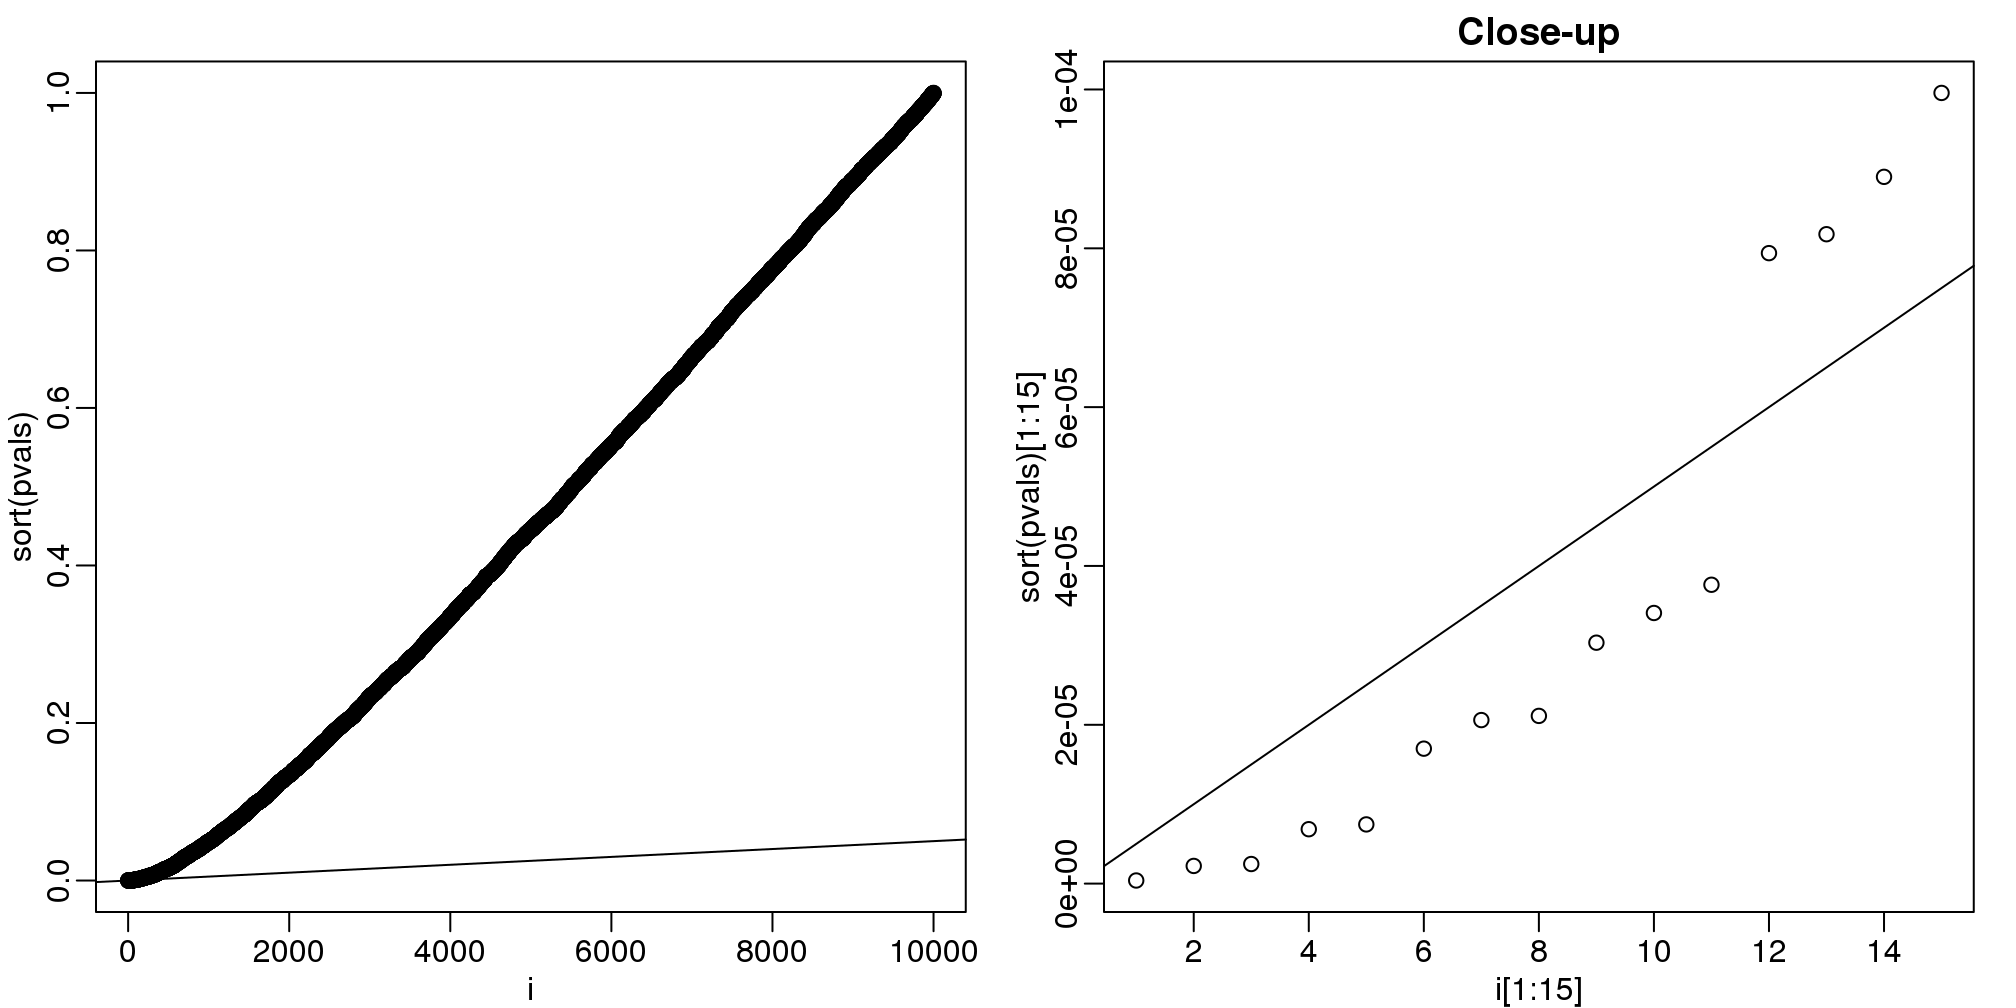 Plotting p-values plotted against their rank illustrates the Benjamini-Hochberg procedure. The plot on the right is a close-up of the plot on the left.